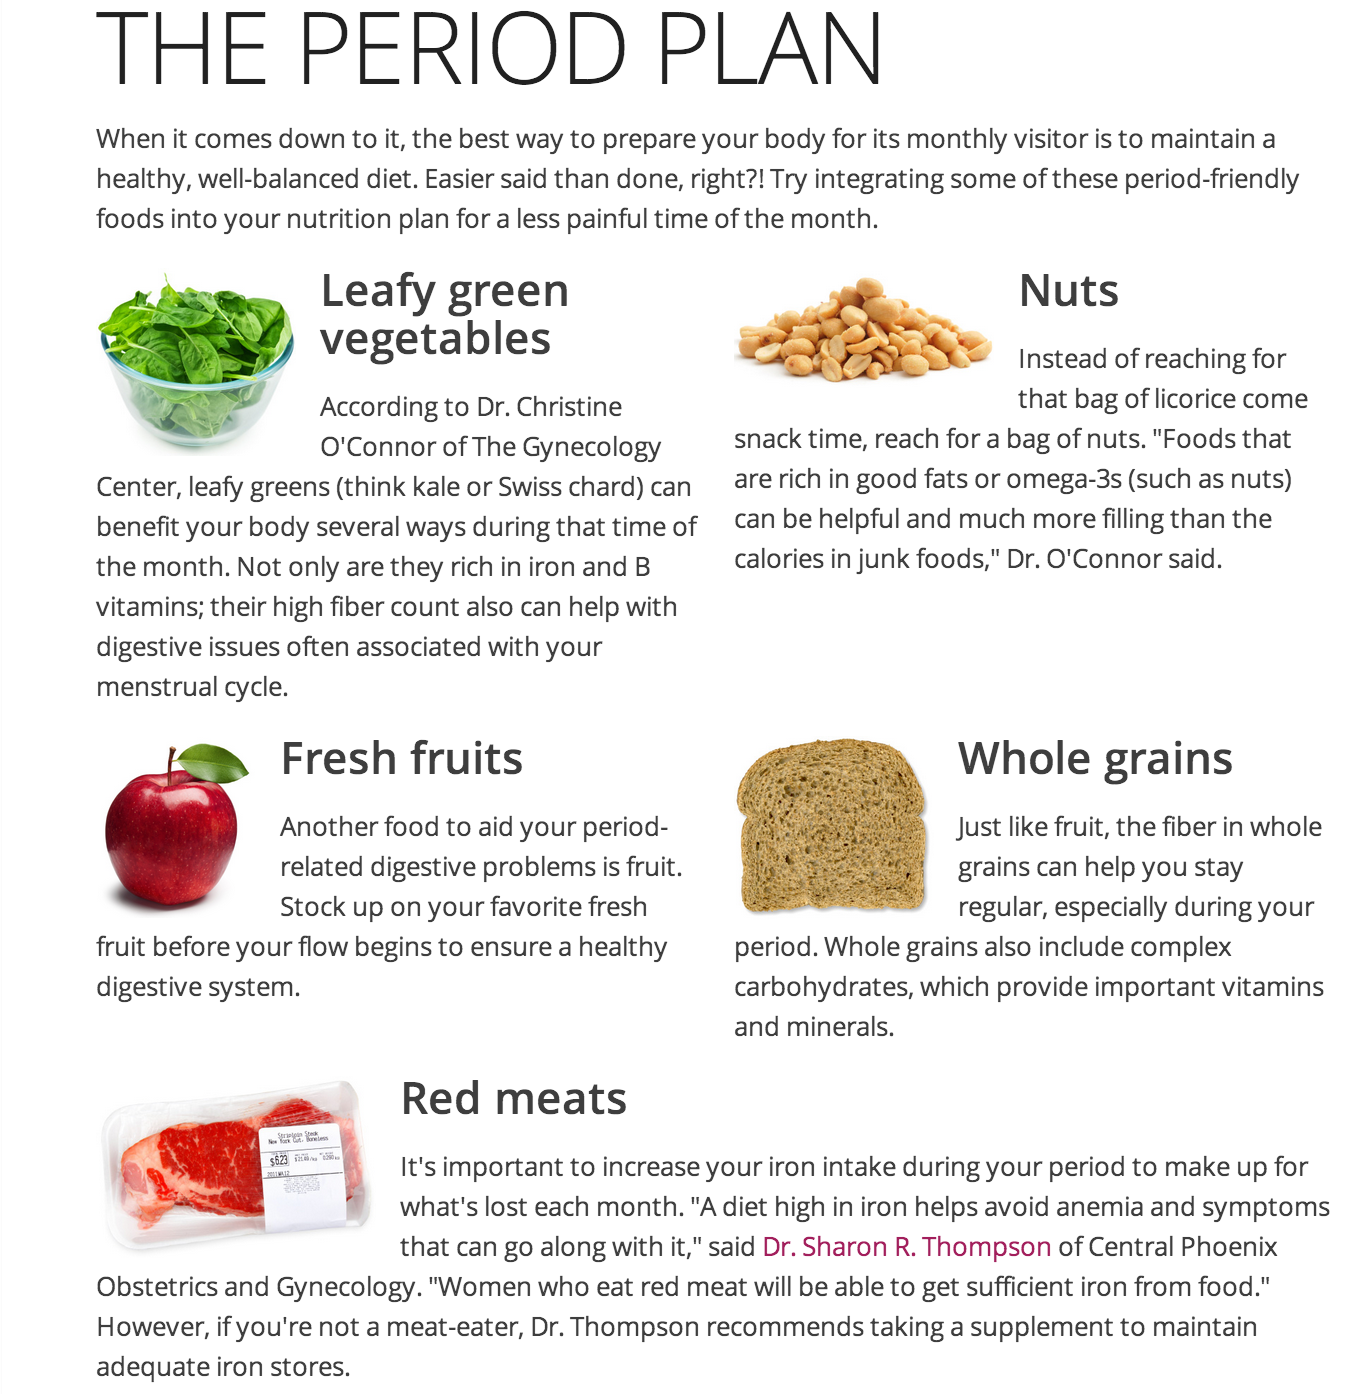 5 Foods you should eat during your period http://www ...